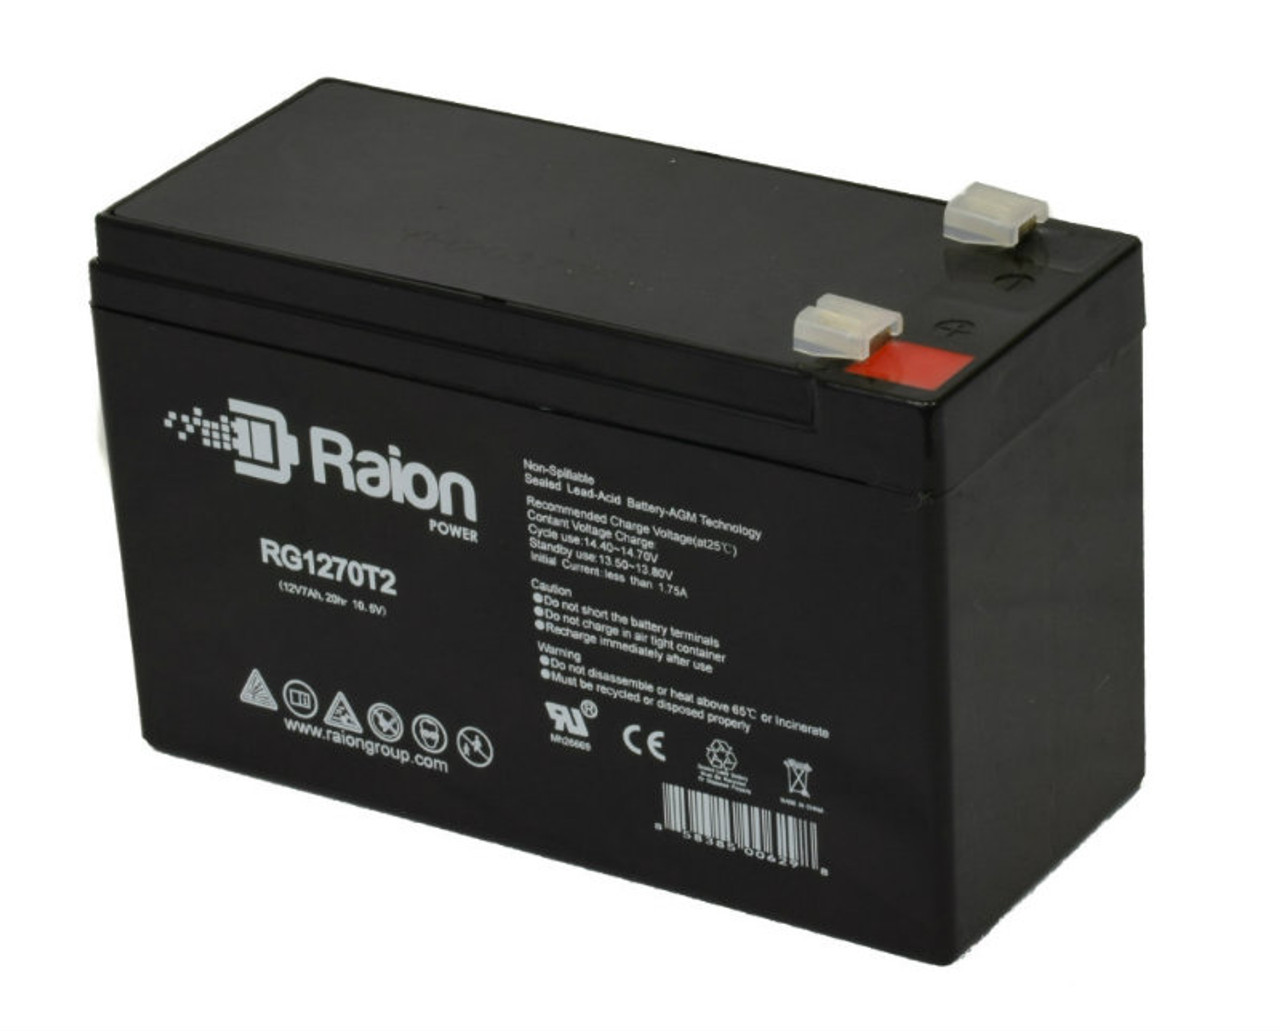 Raion Power RG1270T1 12V 7Ah Non-Spillable Replacement Battery for GE Medical Systems LOGIQ 9 Ultrasound